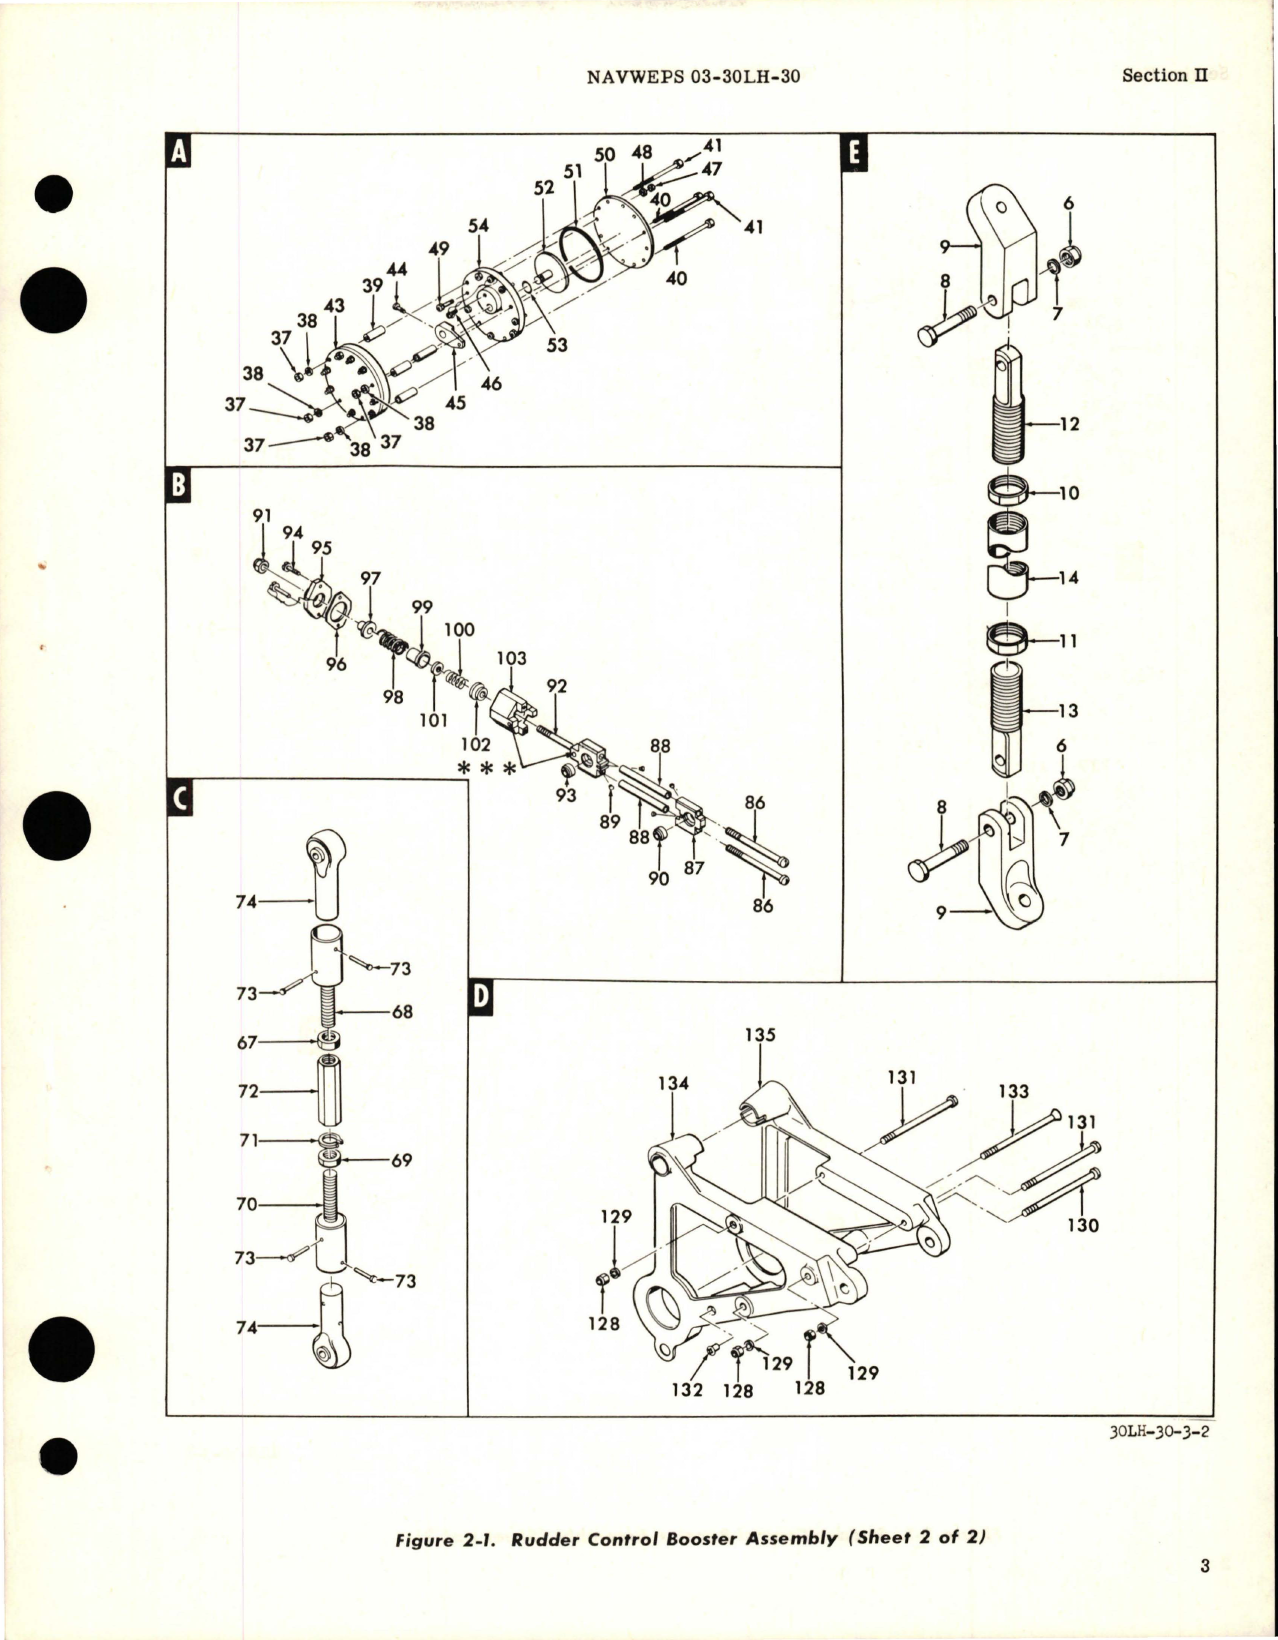 Sample page 7 from AirCorps Library document: Overhaul Instructions for Rudder Control Booster Assembly - Part 372021-5 